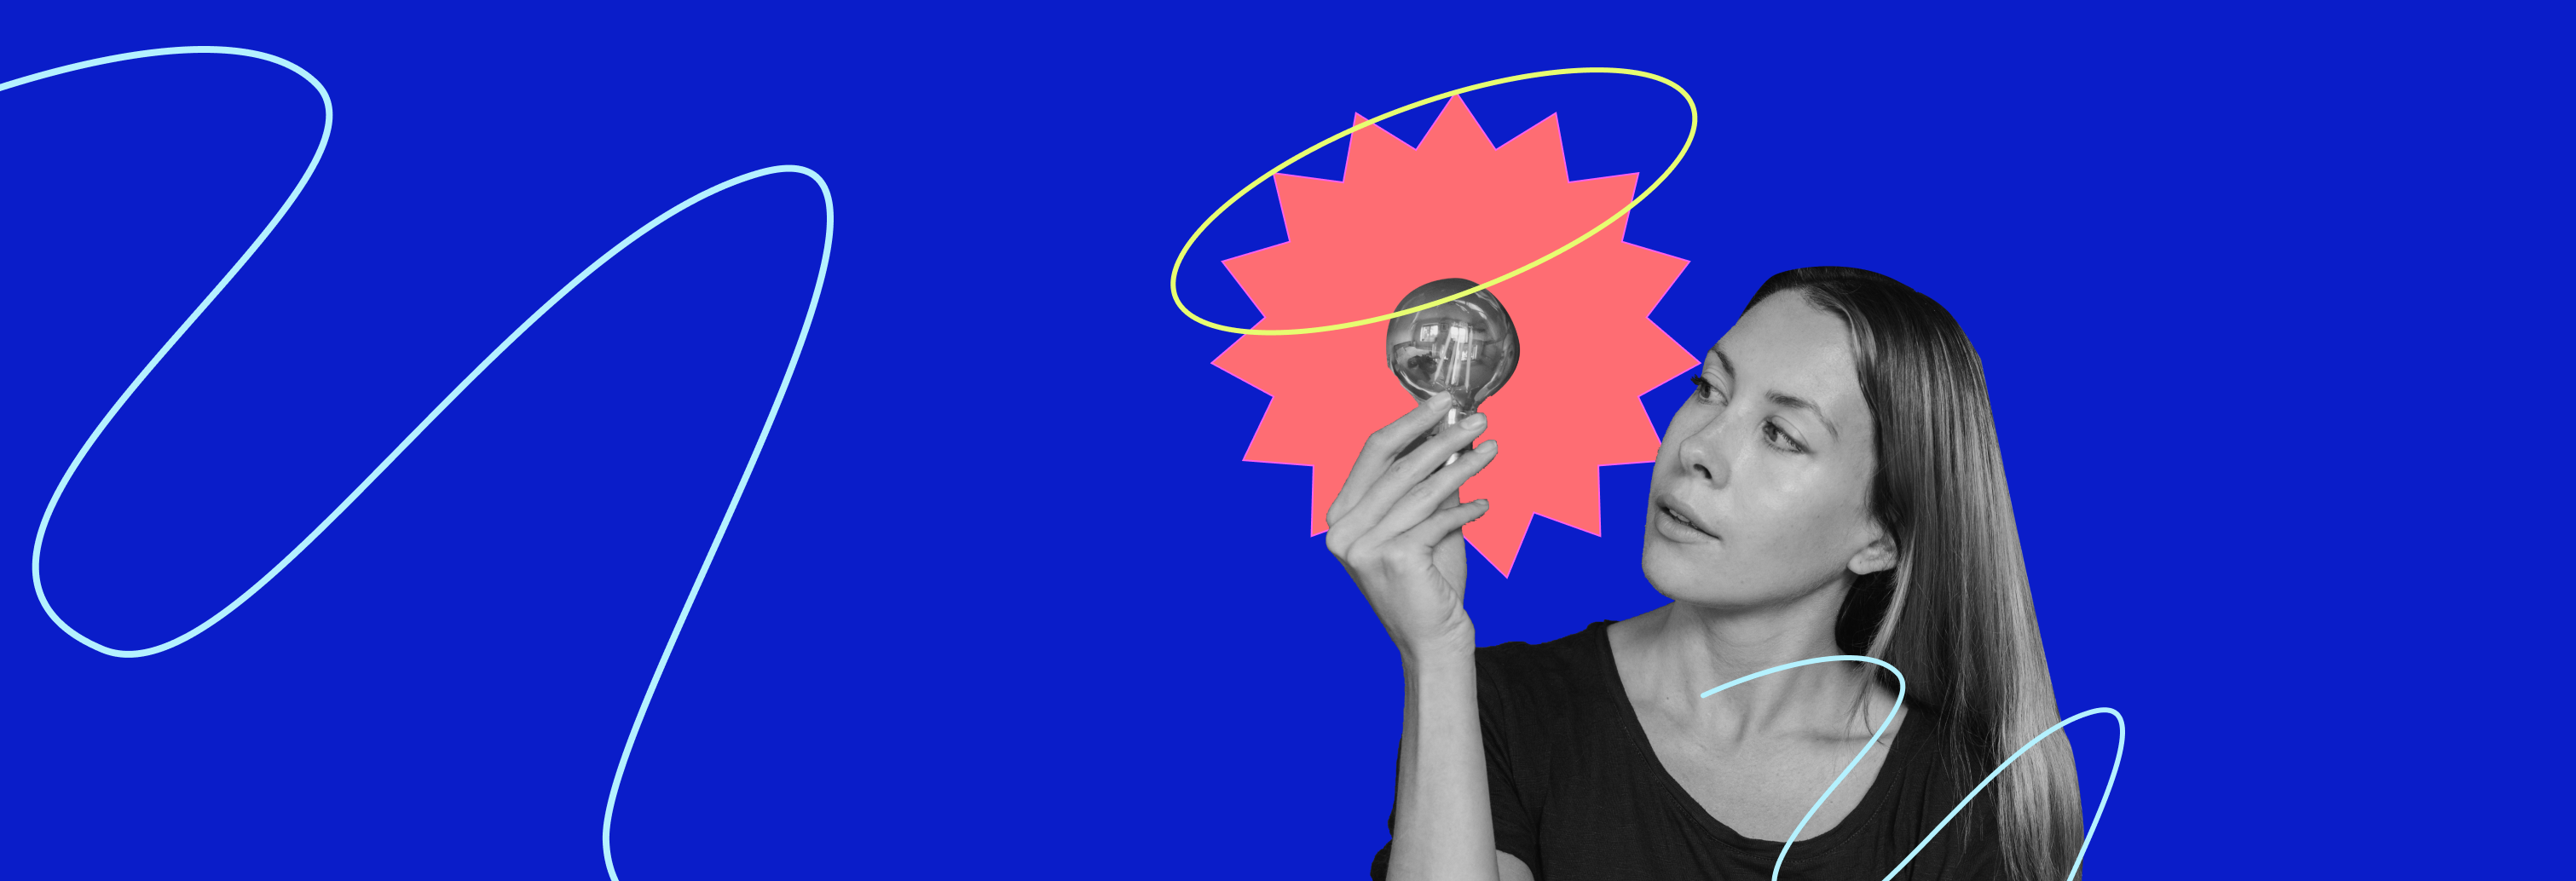 Image of a woman holding a lightbulb with starburst and scribble illustrations overlayed